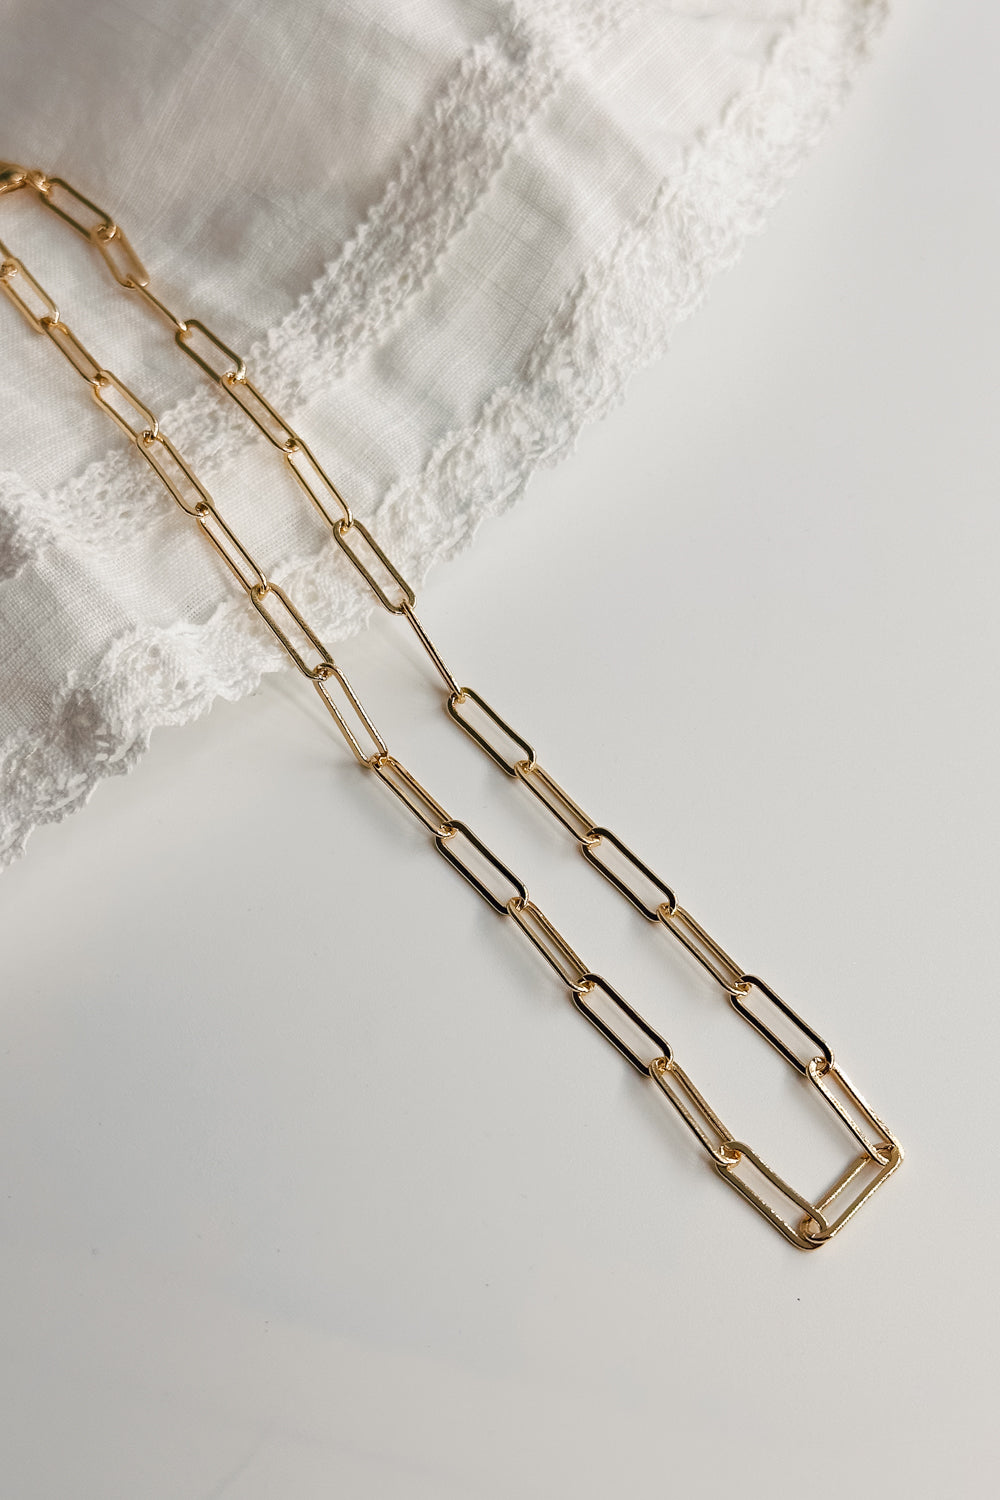 Image shows the Maria Gold Oval Chain Link Necklace against a white background. Necklace has gold oval links. Shown without charms.